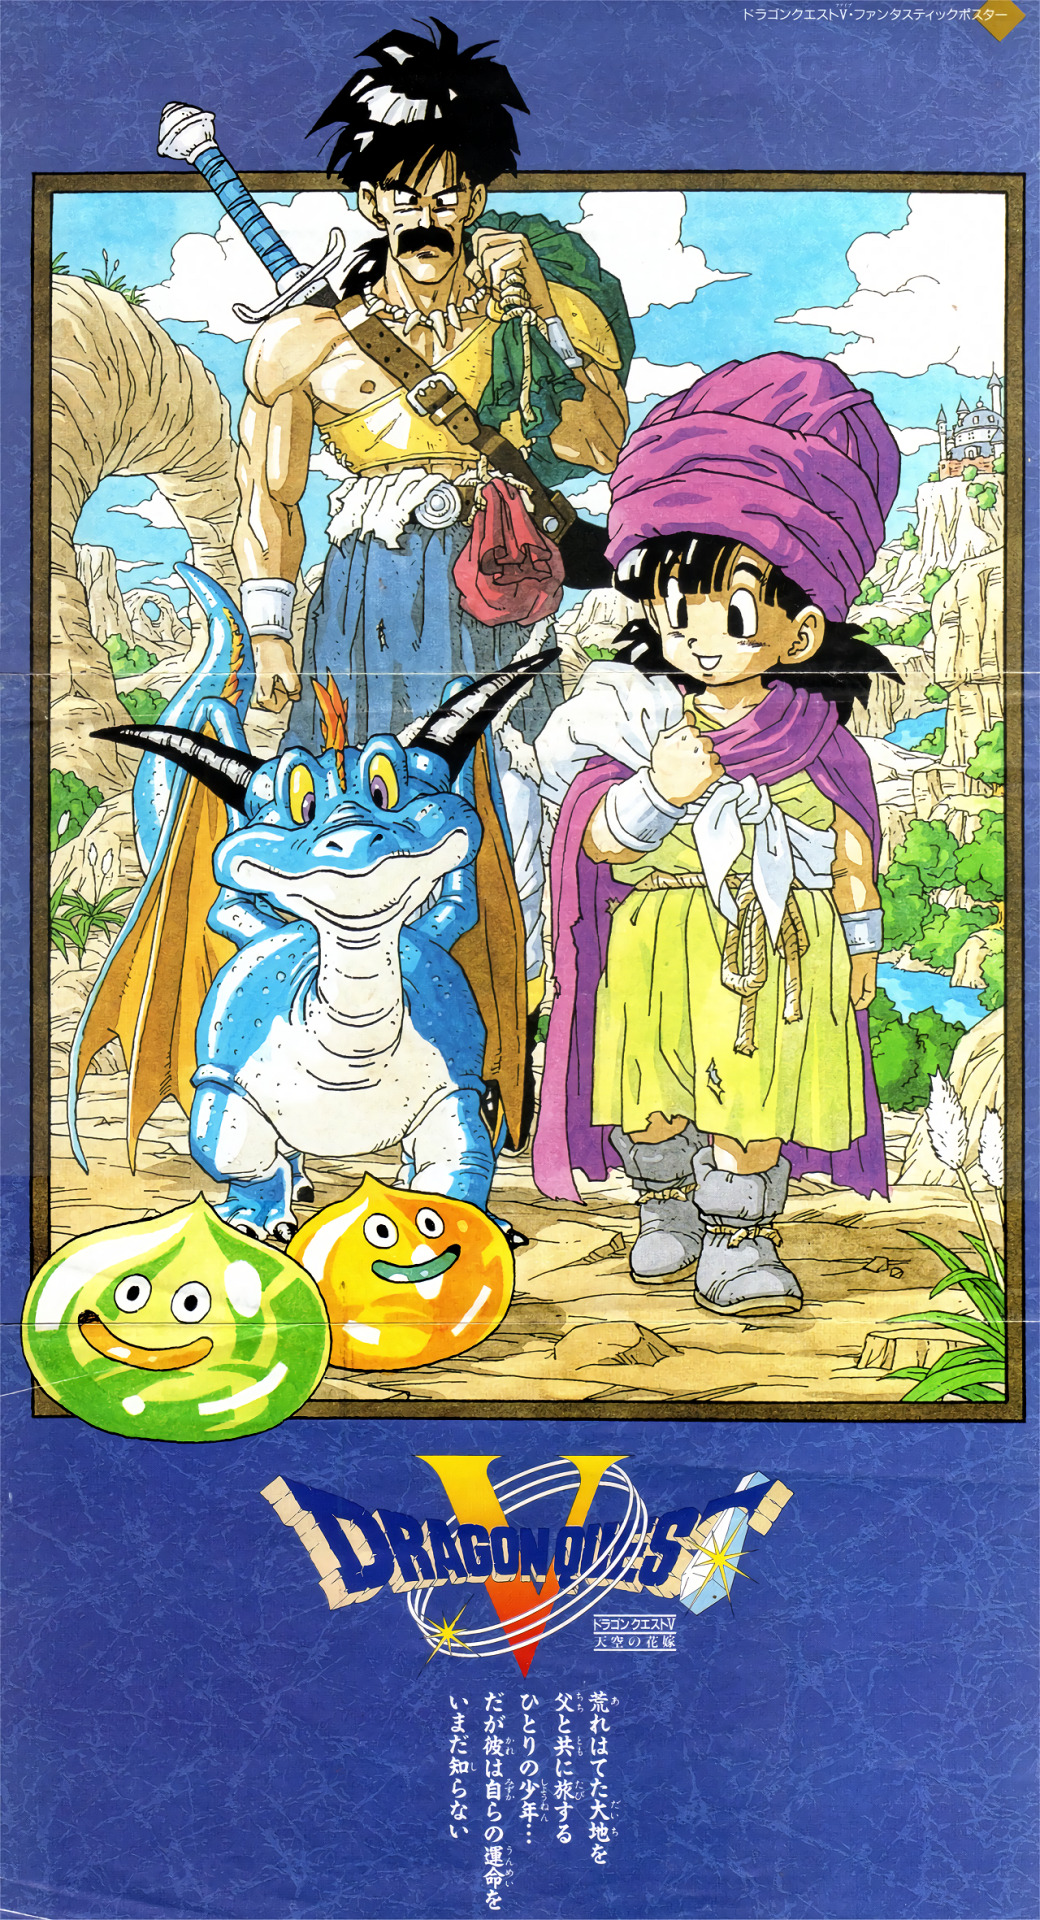 Animarchive Dragon Quest V Poster Illustrated By Akira Toriyama Dragon Quest V Guide Jump